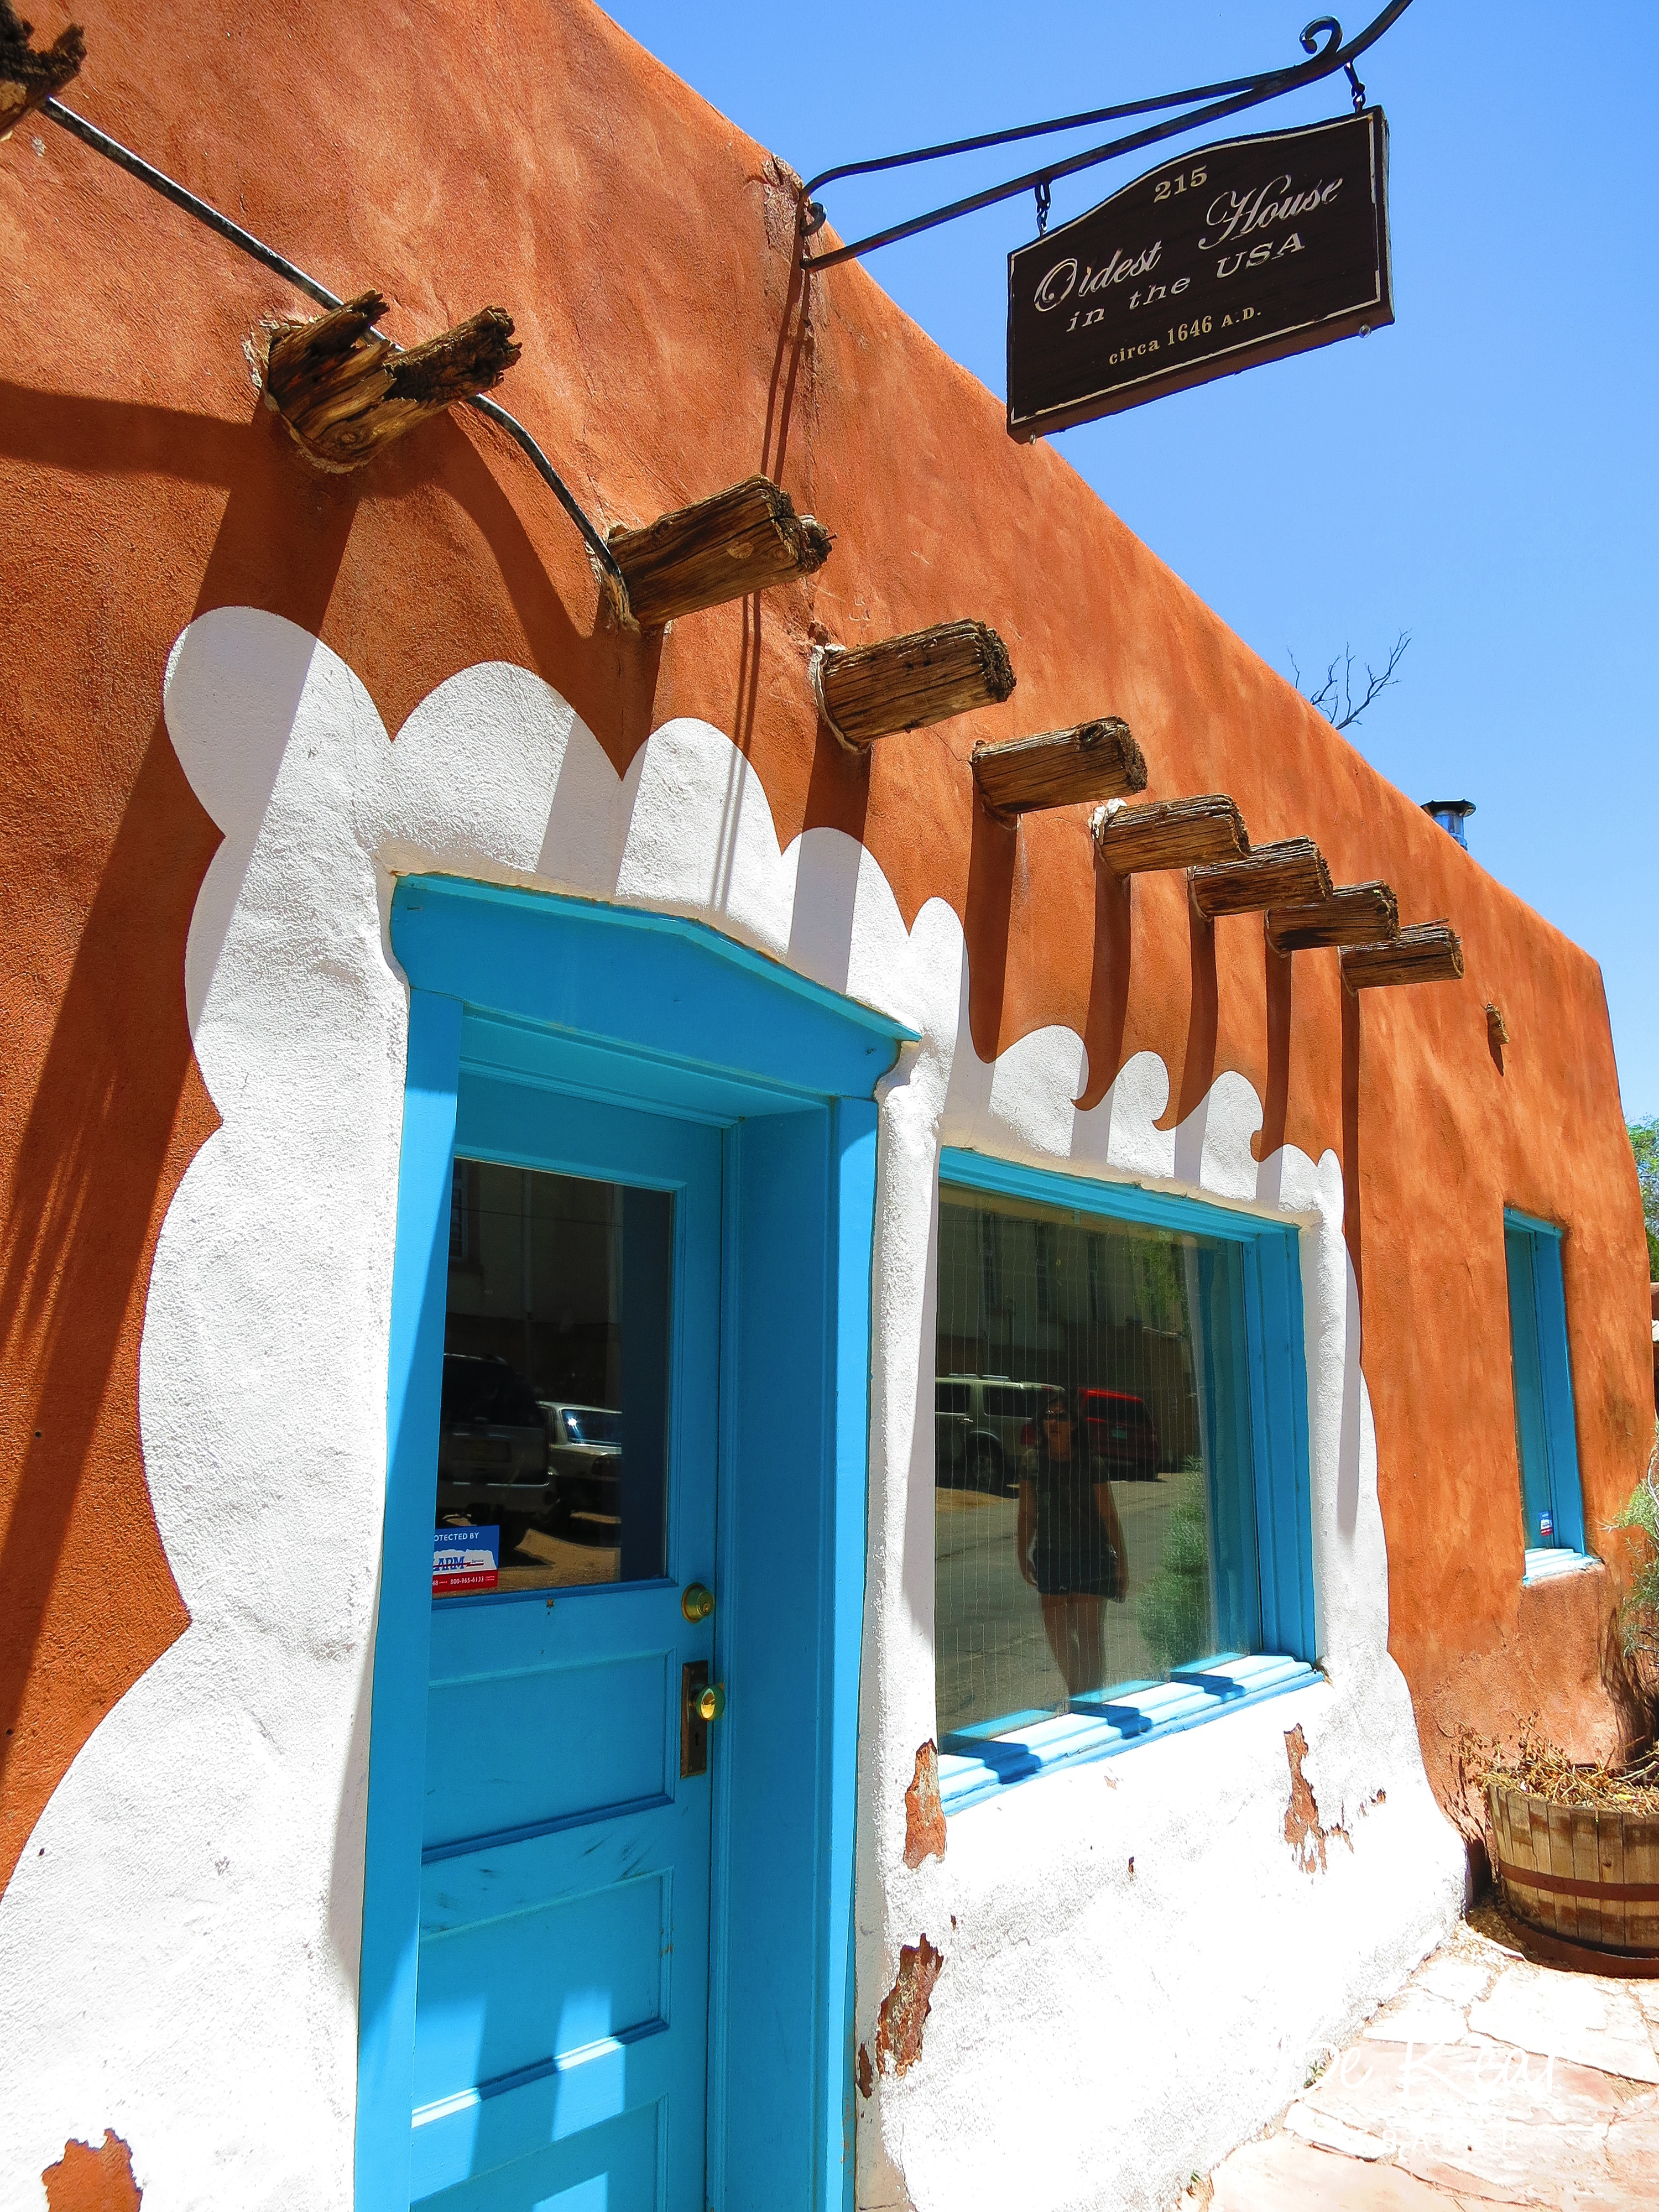 A store is accented by a sign that claims that the build is the oldest house in the USA in Santa Fe, New Mexico